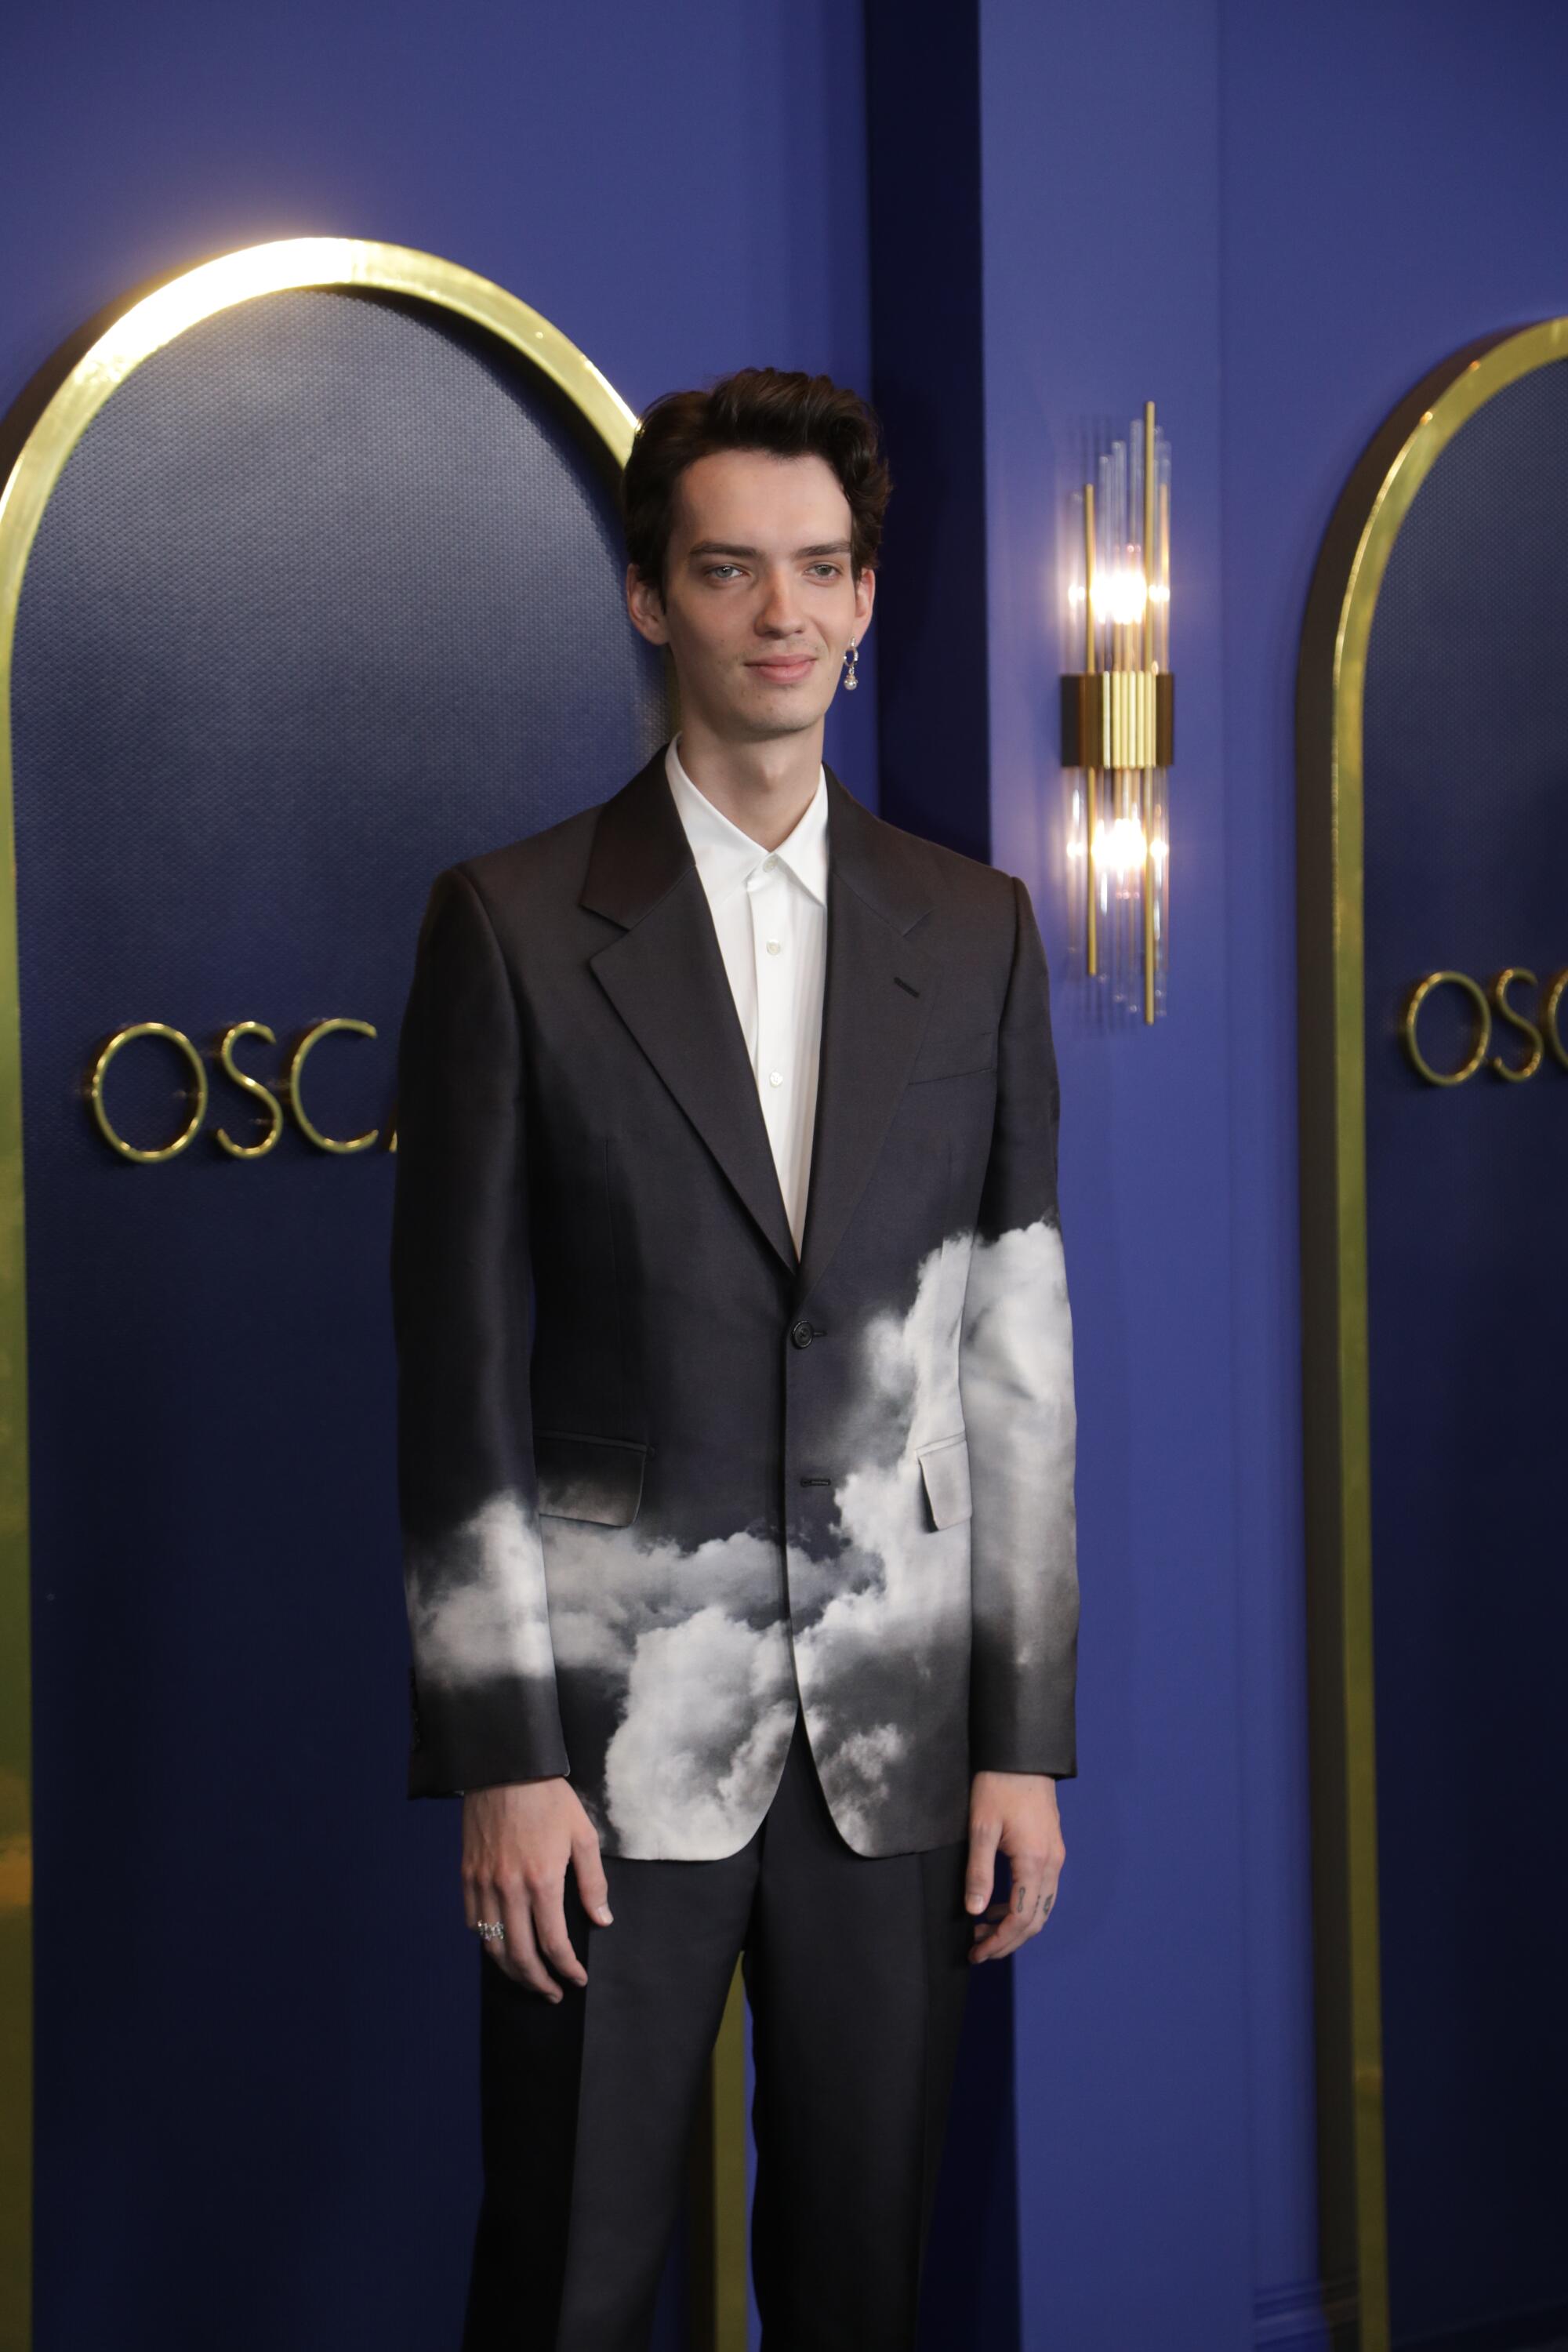 Kodi Smit-McPhee earned his first Oscar nomination at 25 years old for "The Power of the Dog"